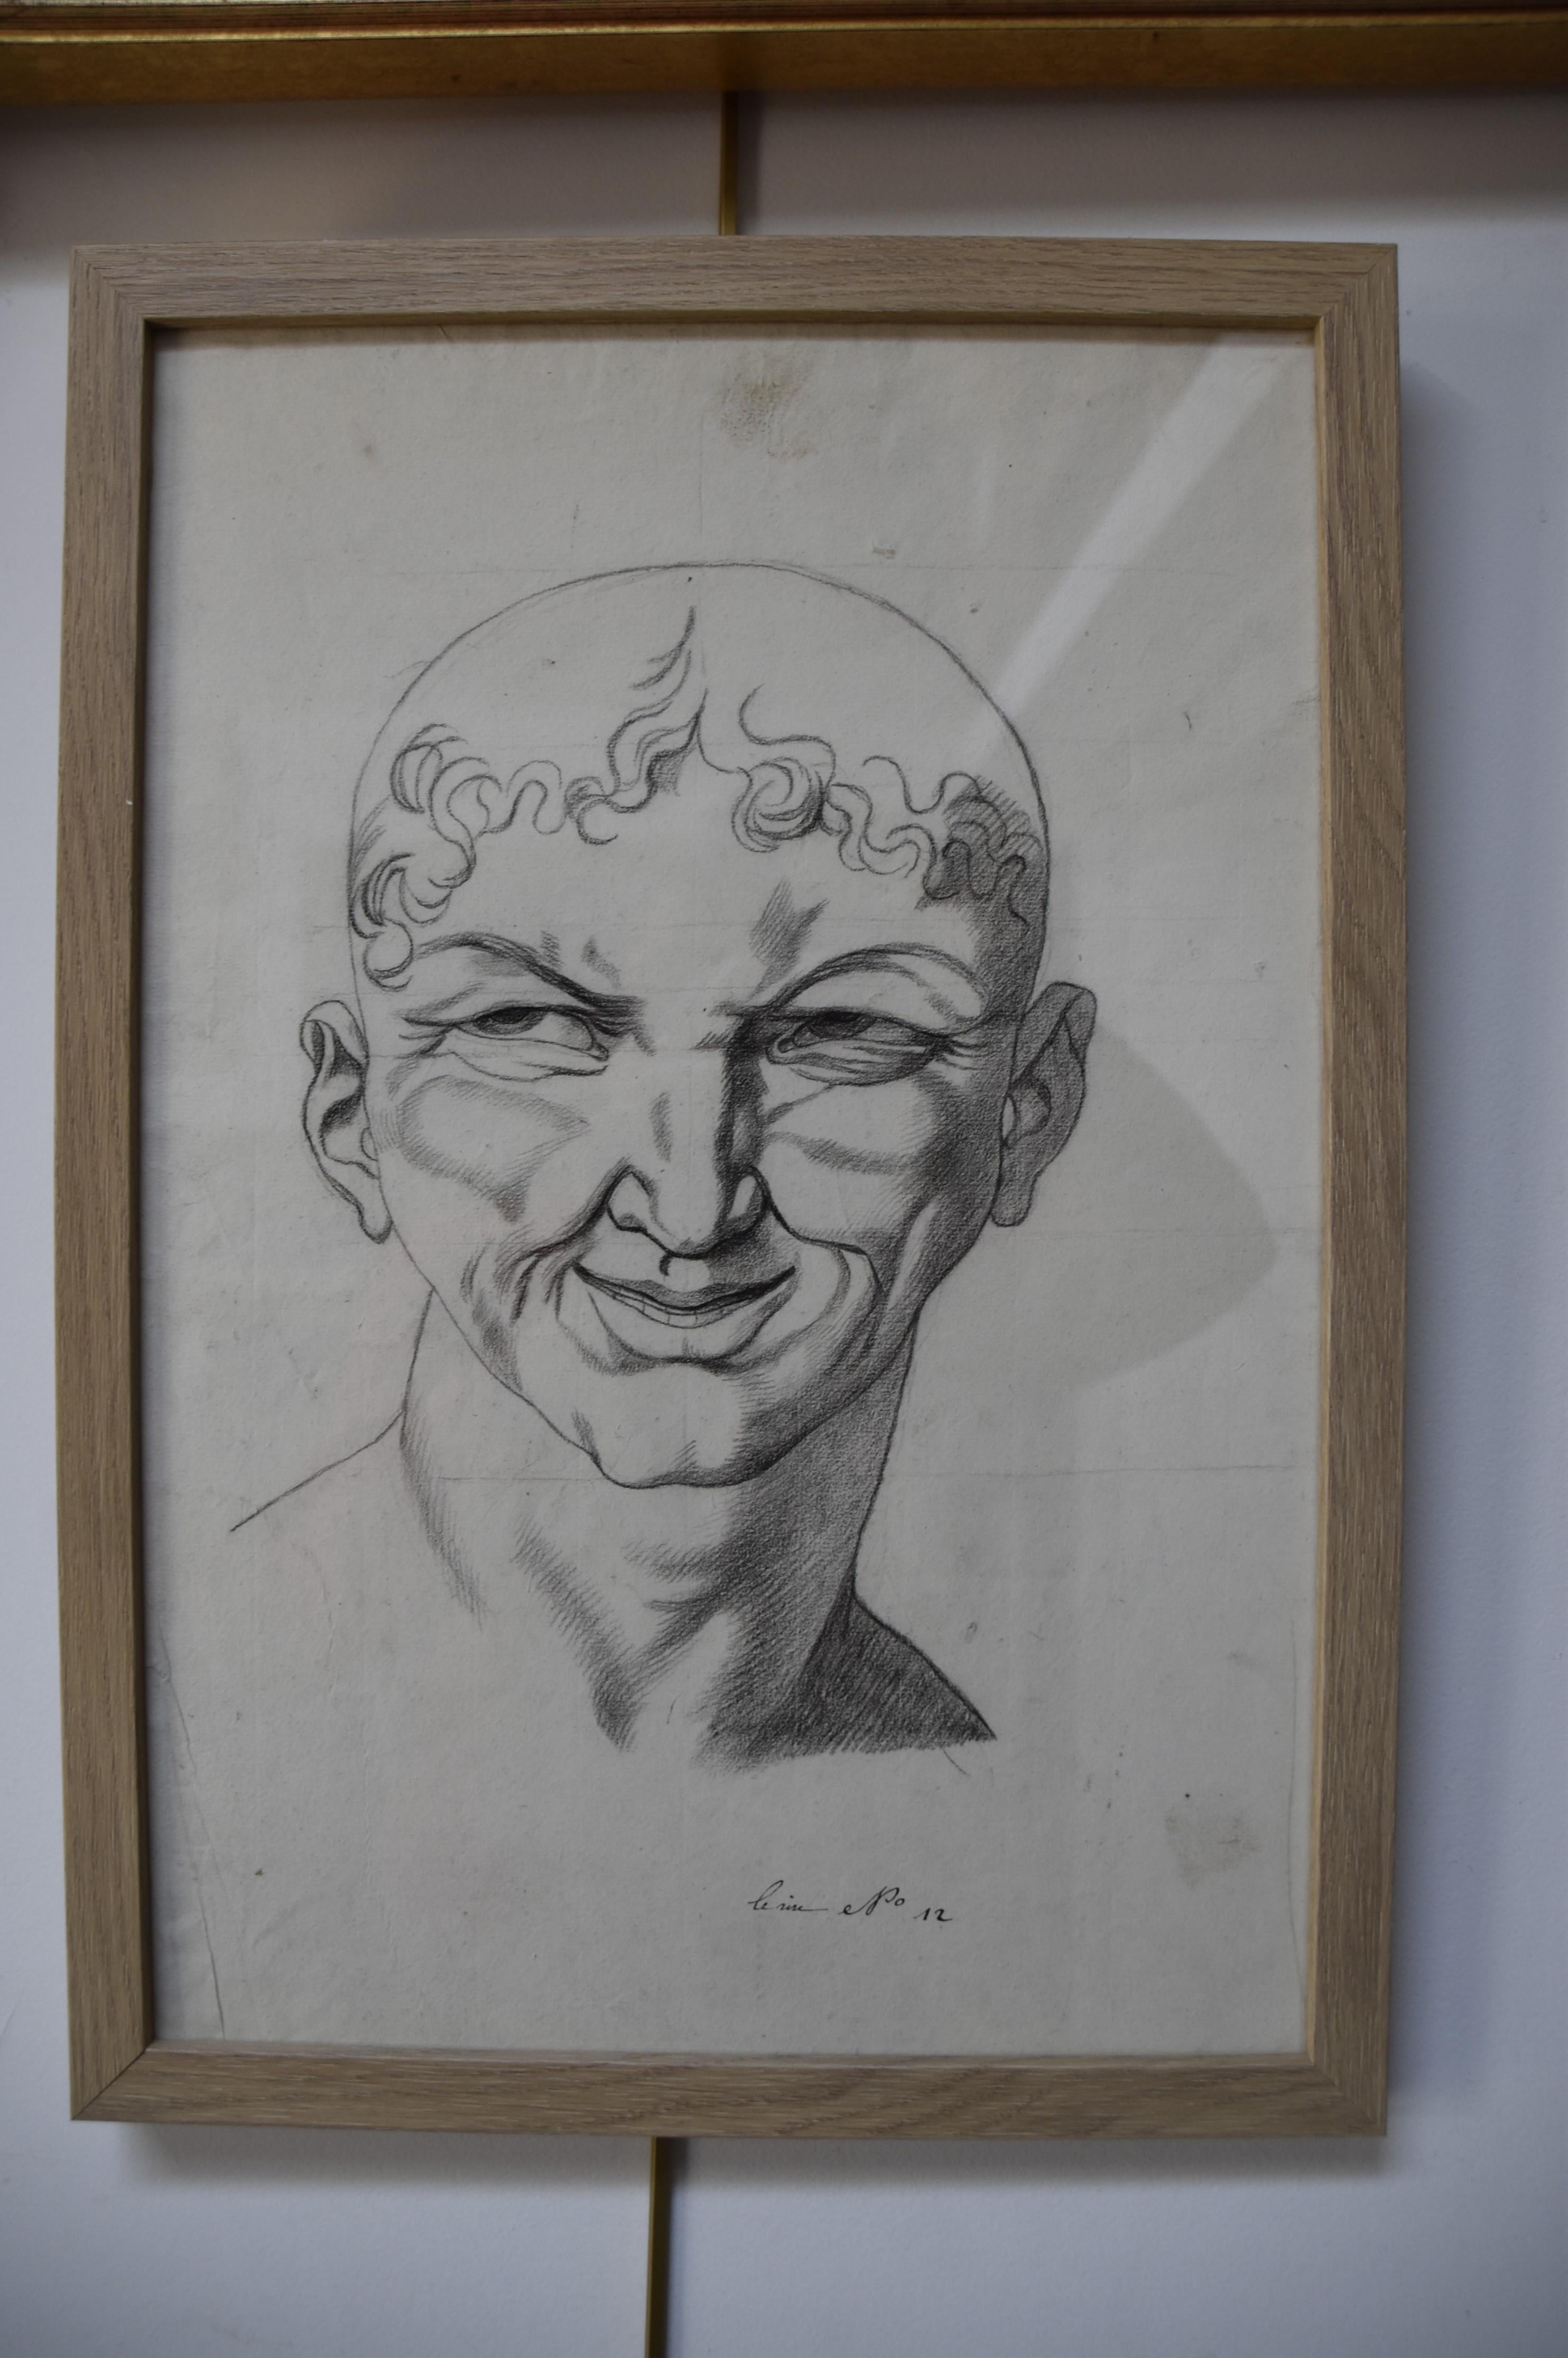 French School 18th Century, Le Rire, Laughter as a form of expression, drawing - Gray Portrait by Unknown